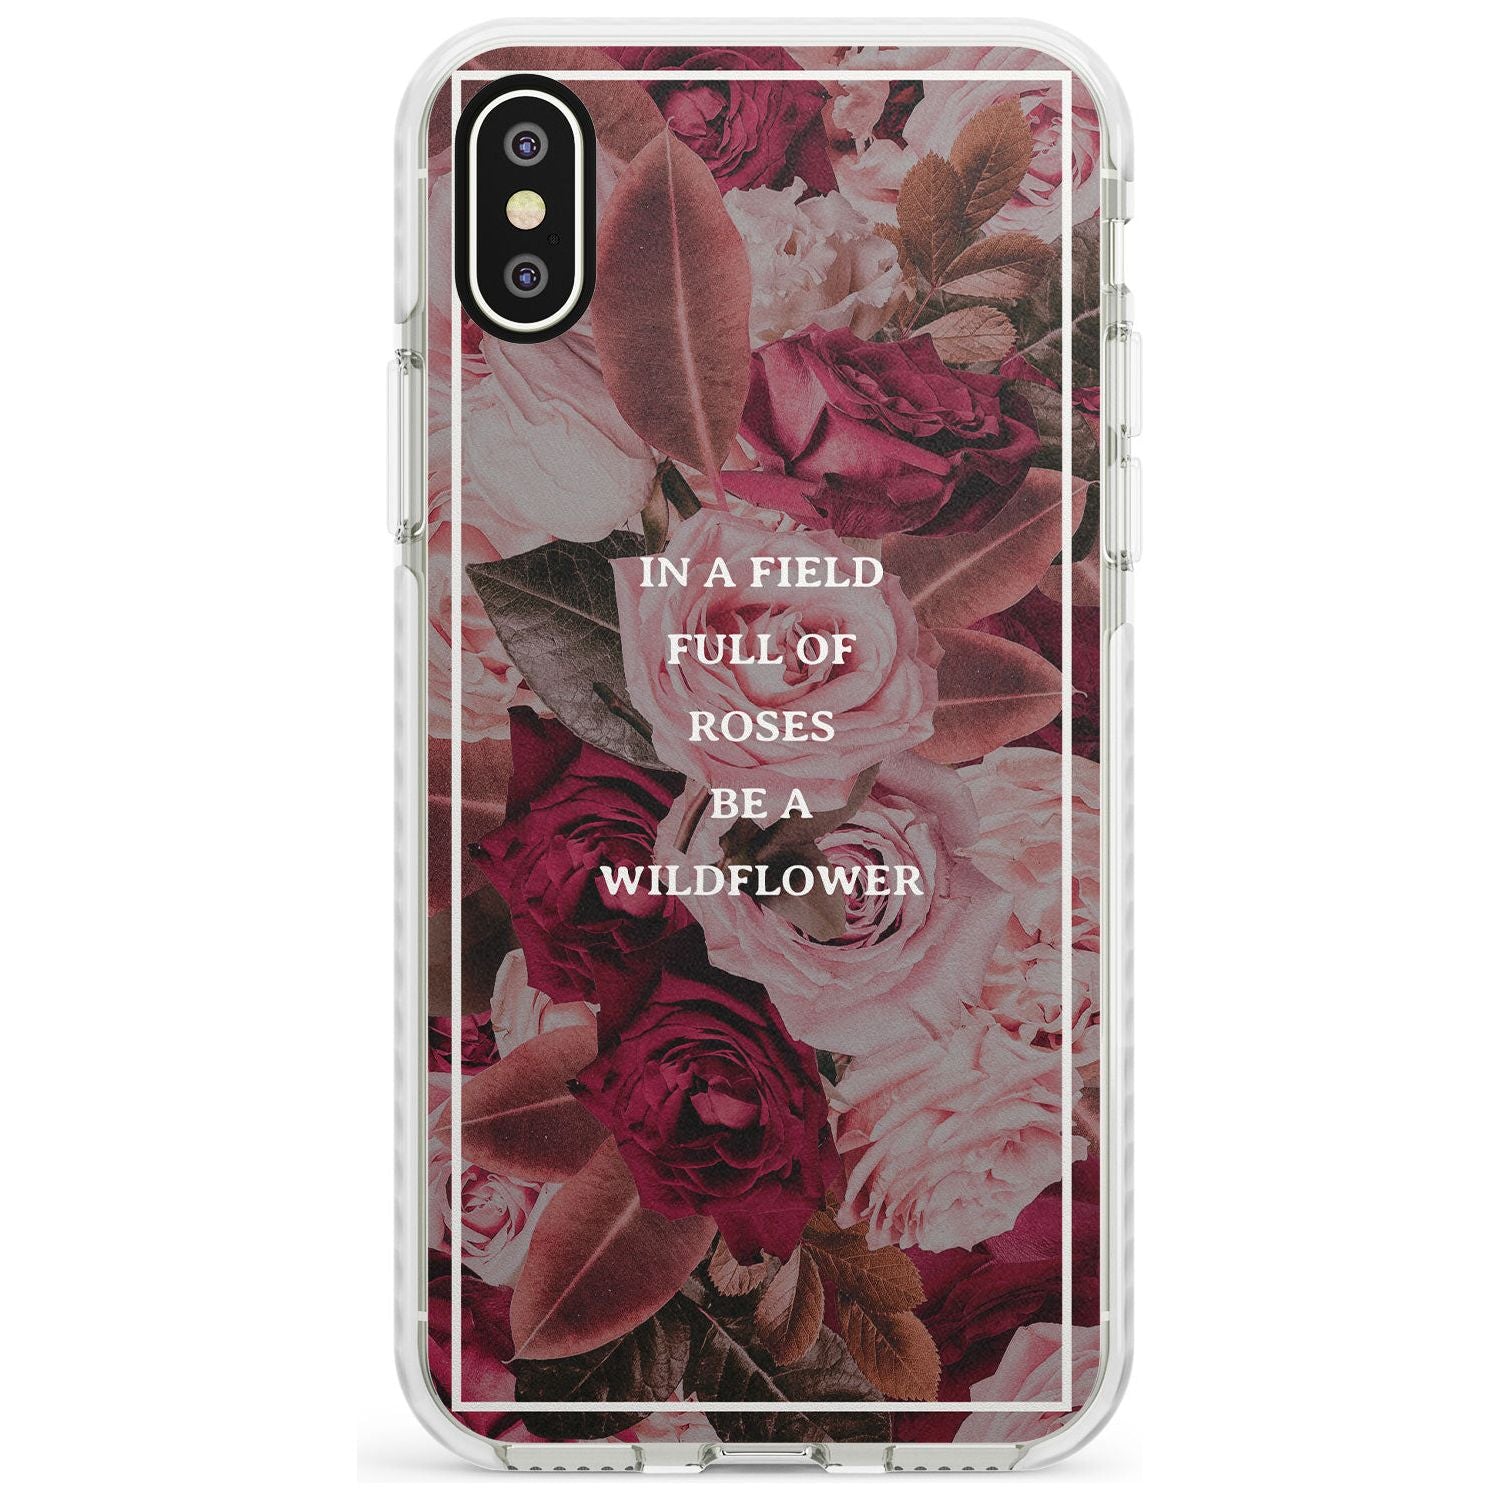 Be a Wildflower Floral Quote Impact Phone Case for iPhone X XS Max XR